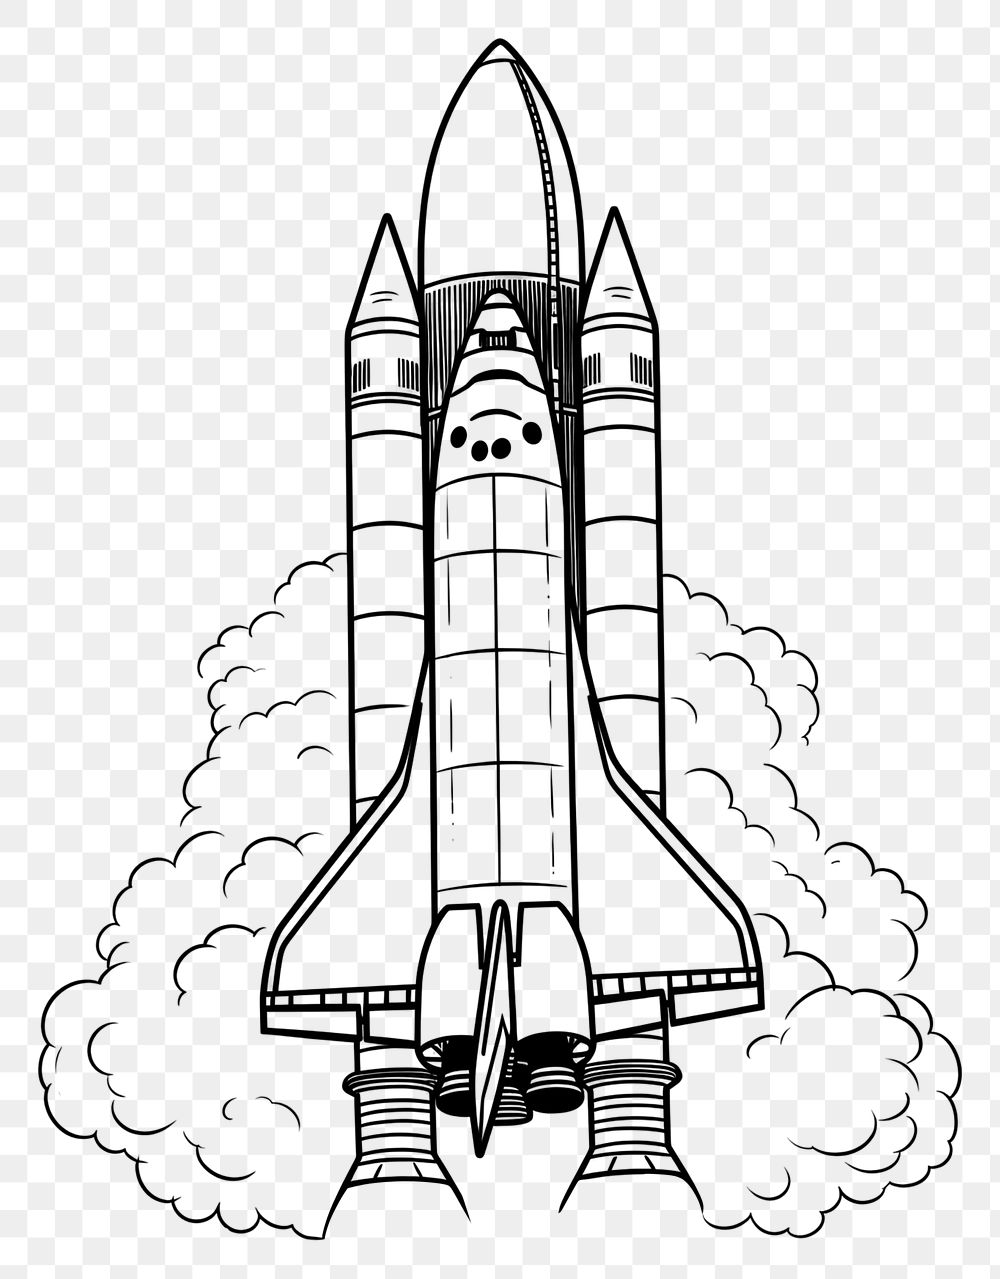 How To Draw A Rocket - An Epic 3D Rocket In A Few Easy Steps - Let's Draw  That! | Easy drawings, Rocket drawing, Simple cartoon